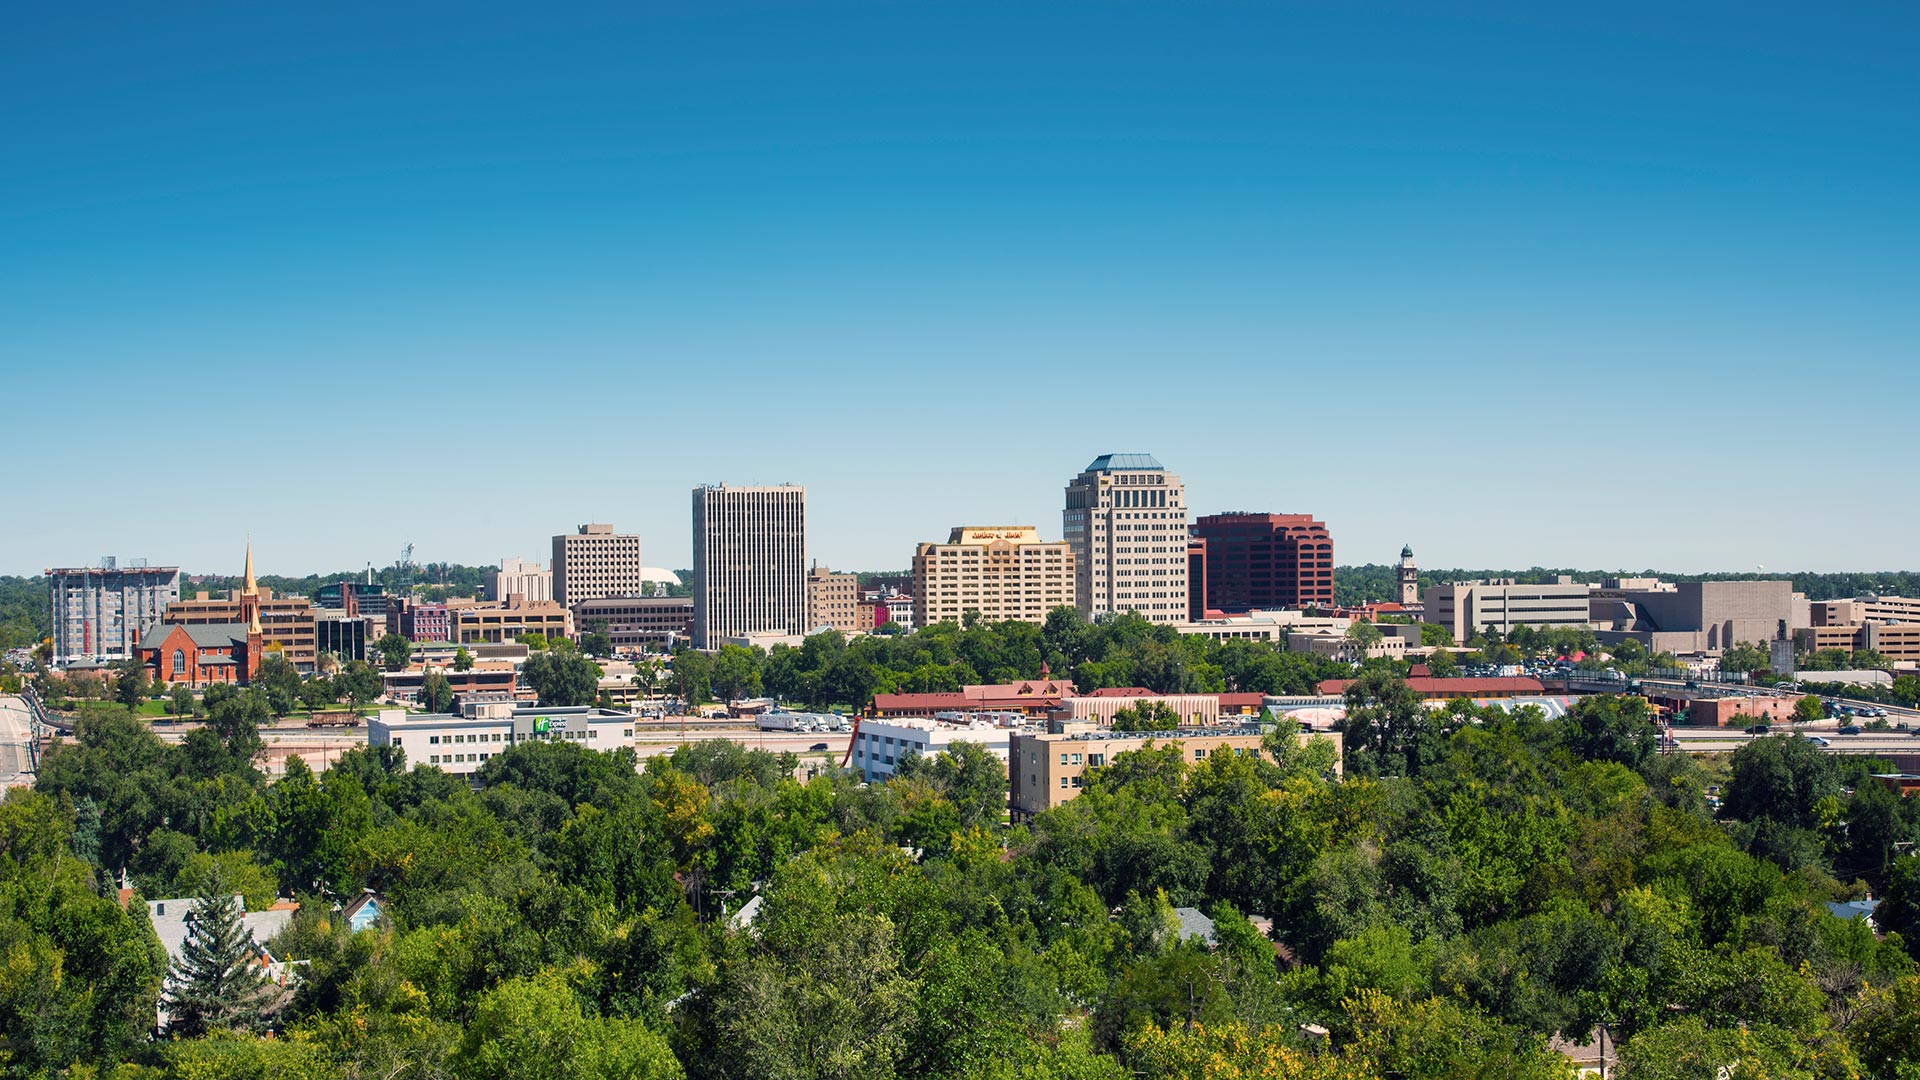 Downtown Colorado Springs skyline on a clear day